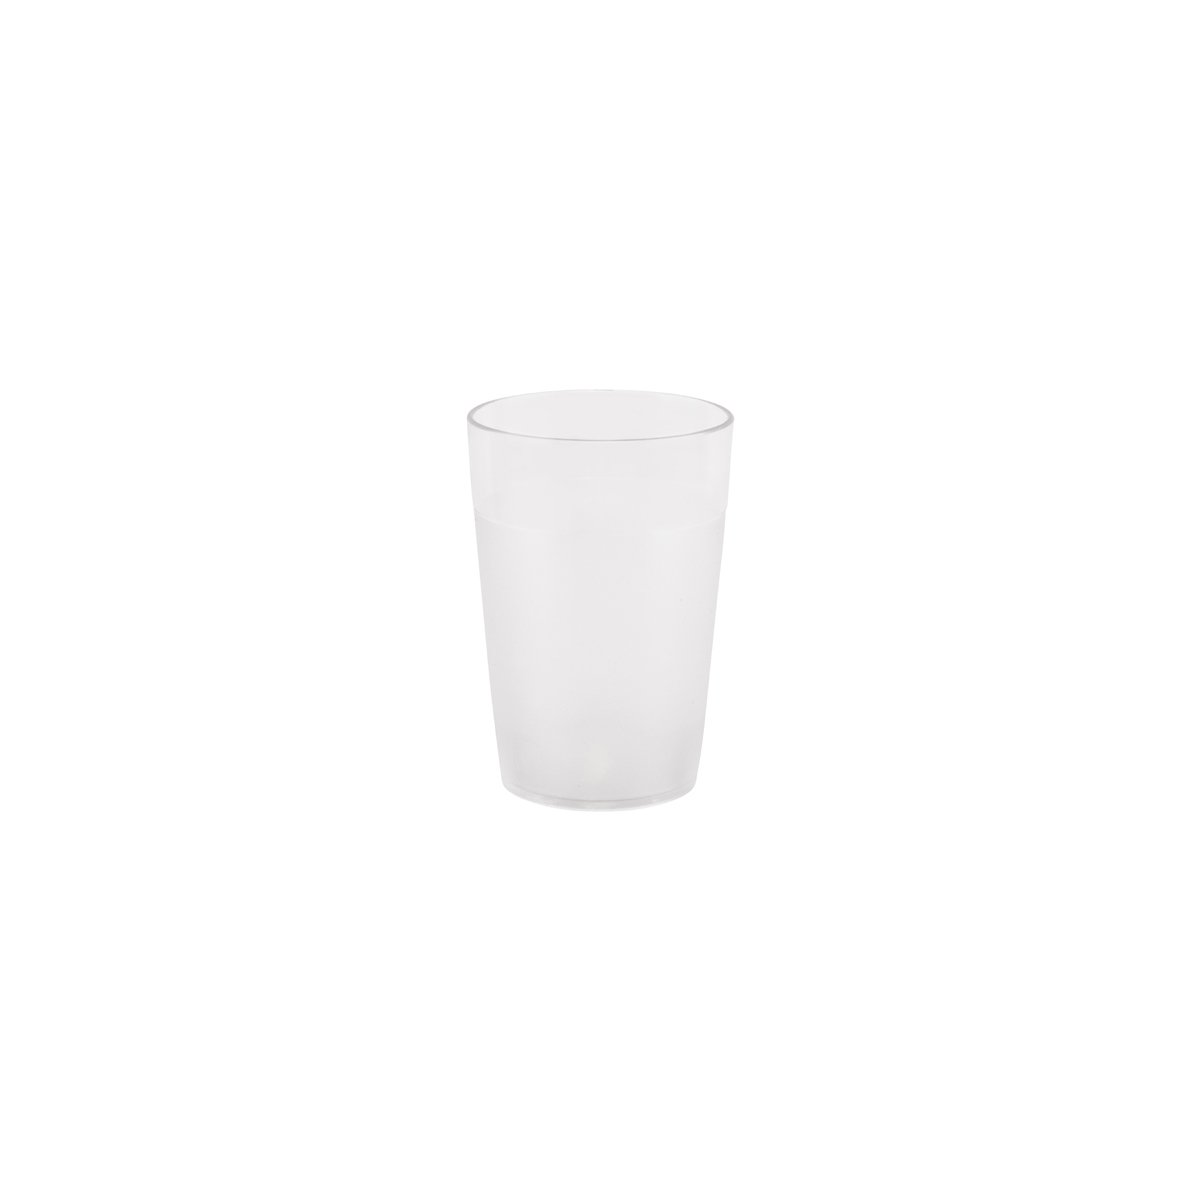 ROLTEXR103CL Roltex Polycarbonate Tumbler Clear 250ml Tomkin Australia Hospitality Supplies